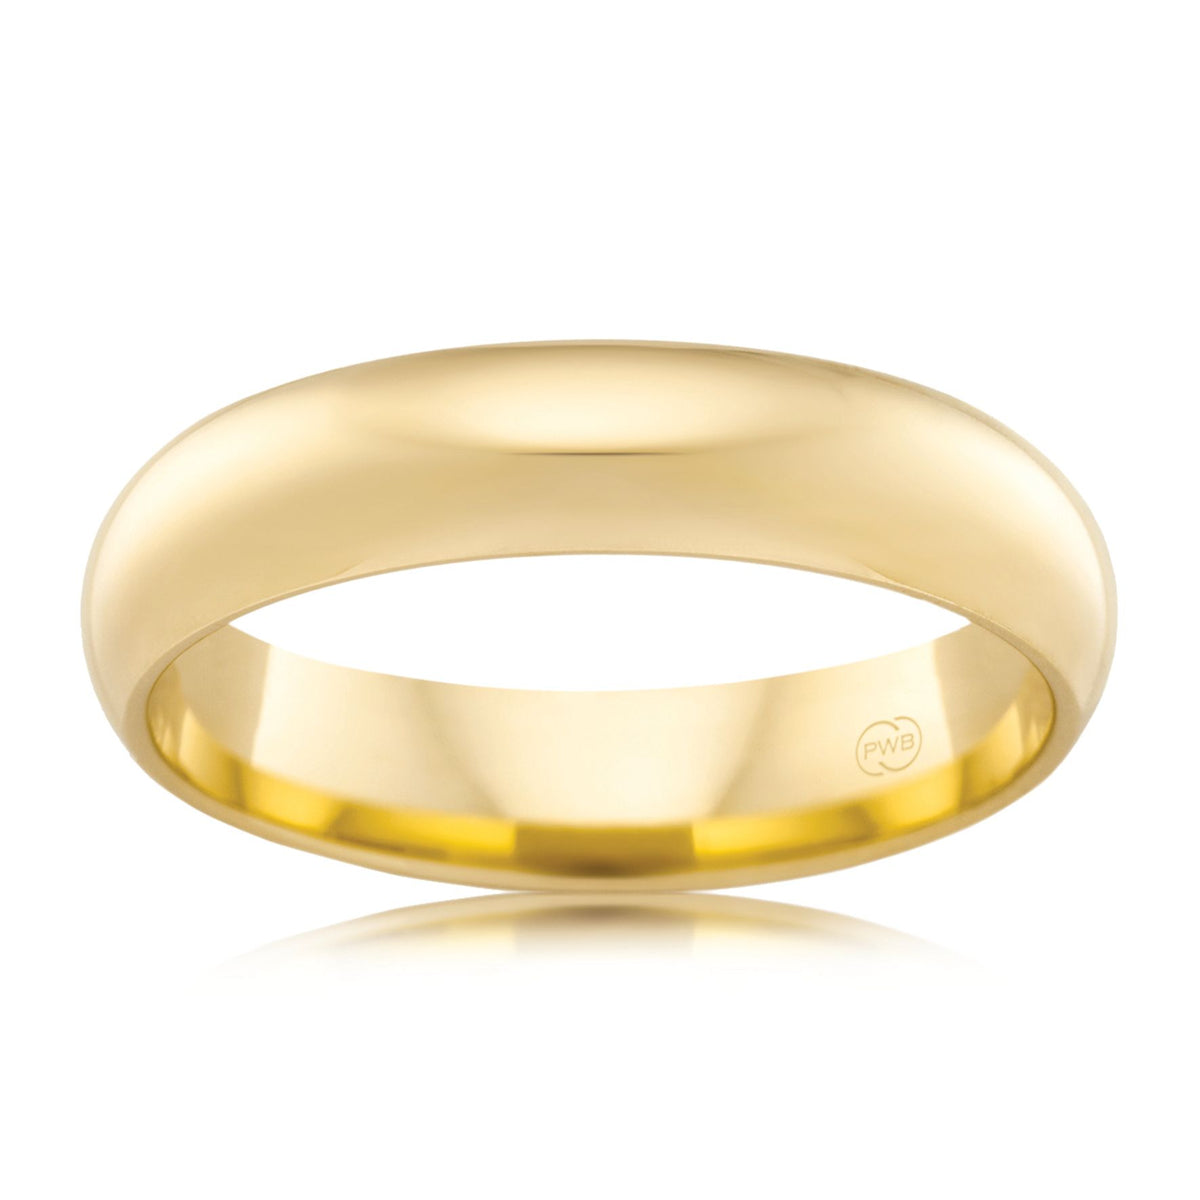 9ct Yellow Gold 5mm Wedding Ring - Duffs Jewellers